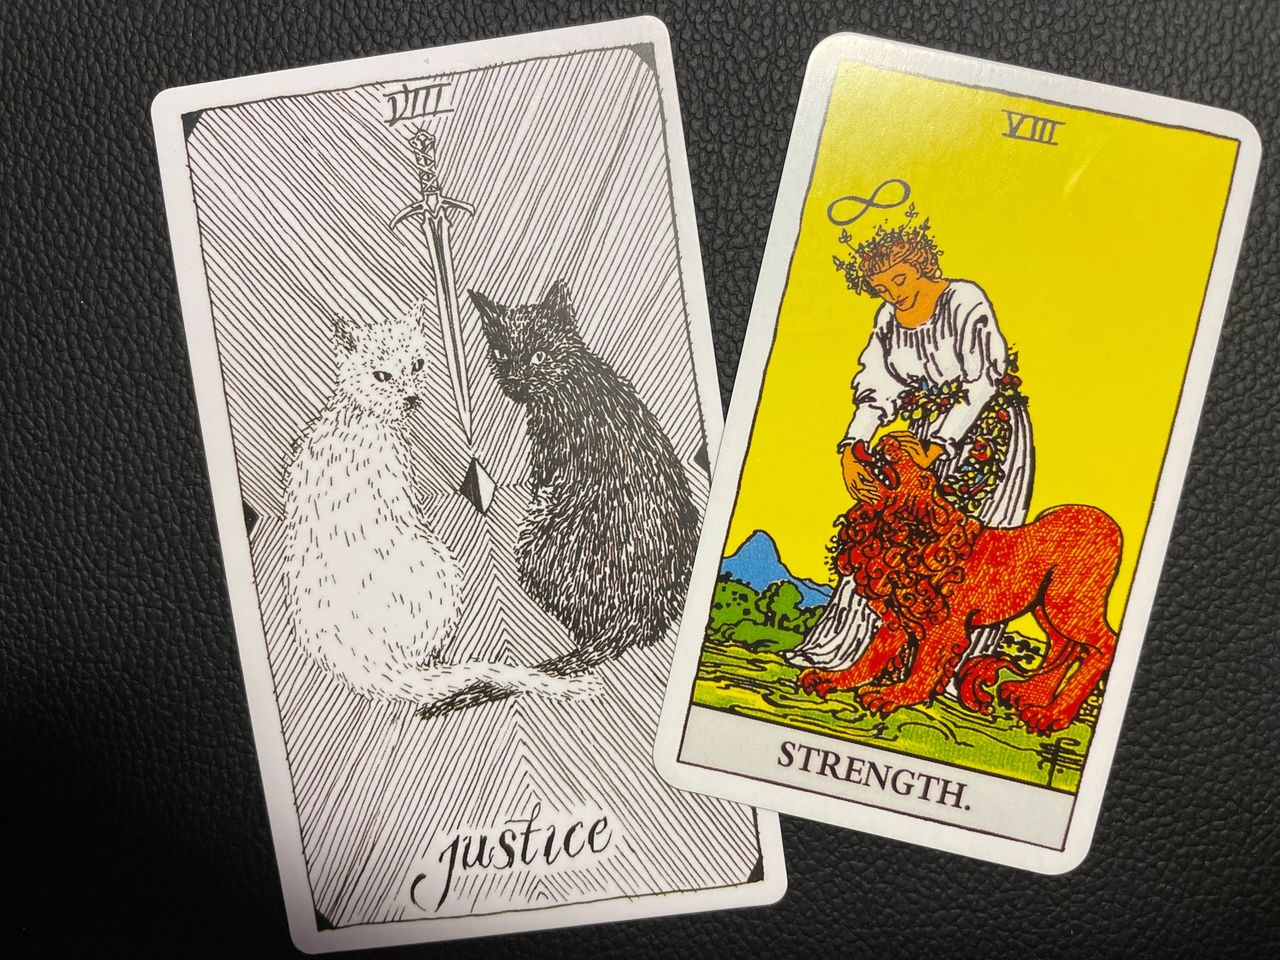 Two tarot cards. One black and white illustration of Justice (viii) with a white cat and a black cat sitting with a sword between them. Lines radiate outward in the background in a diamond pattern. The Second card is the Ryder Scott STRENGTH card with a serene woman in white, gently closing the mouth of a lion. She is crowned by a wreath of red roses, and an infinity sign hovers over her head.